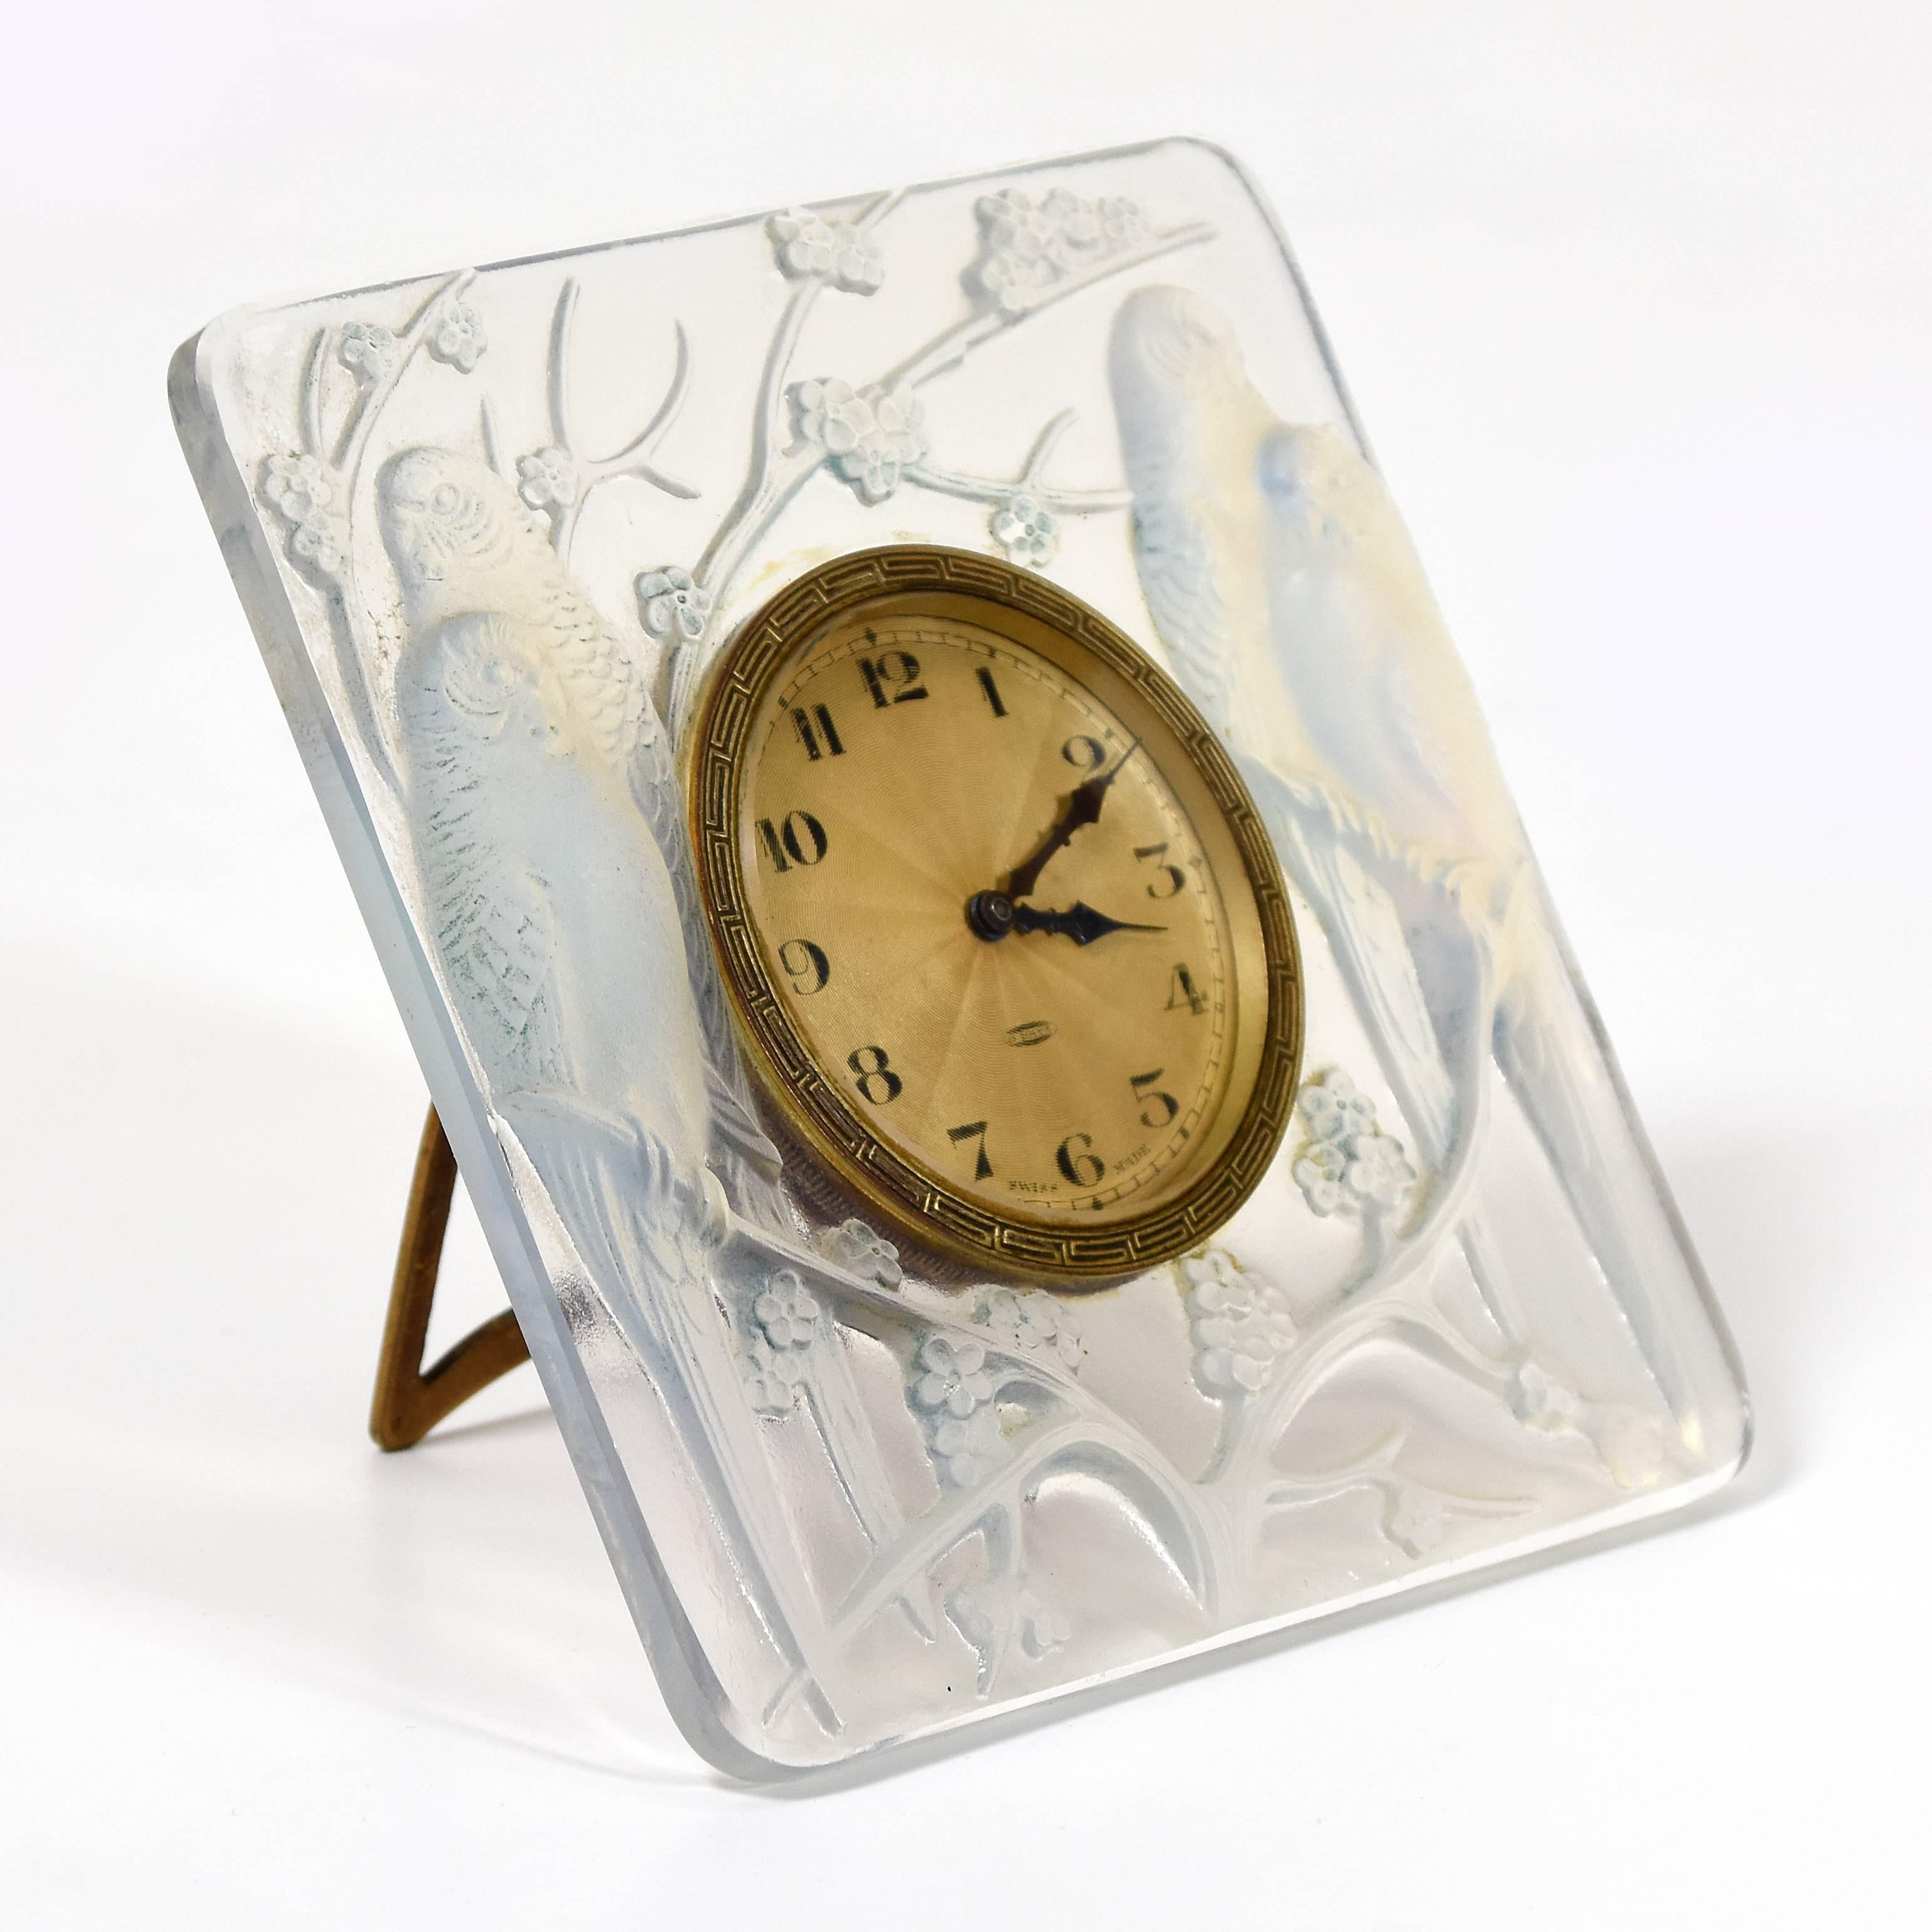 René Lalique (1860-1945)
'Inseperables Pendulette', circa 1926
Moulded clear and opalescent glass clock in working order
no. 765 designed in 1926
Measures: Height 11 cm, width 11 cm, depth 2 cm
moulded signature to the centre base of glass